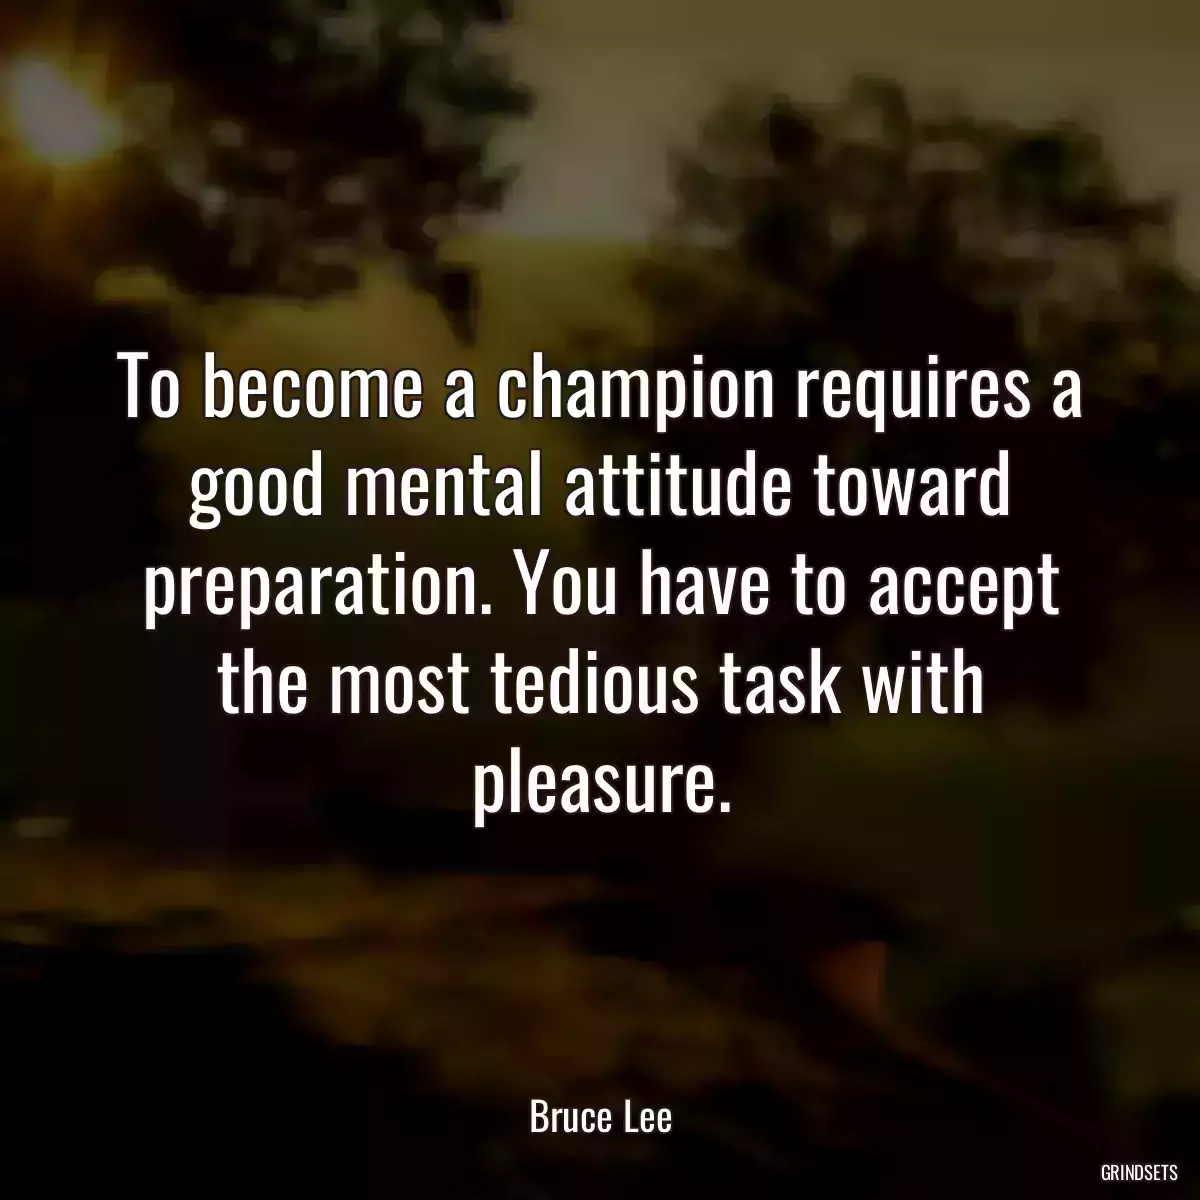 To become a champion requires a good mental attitude toward preparation. You have to accept the most tedious task with pleasure.